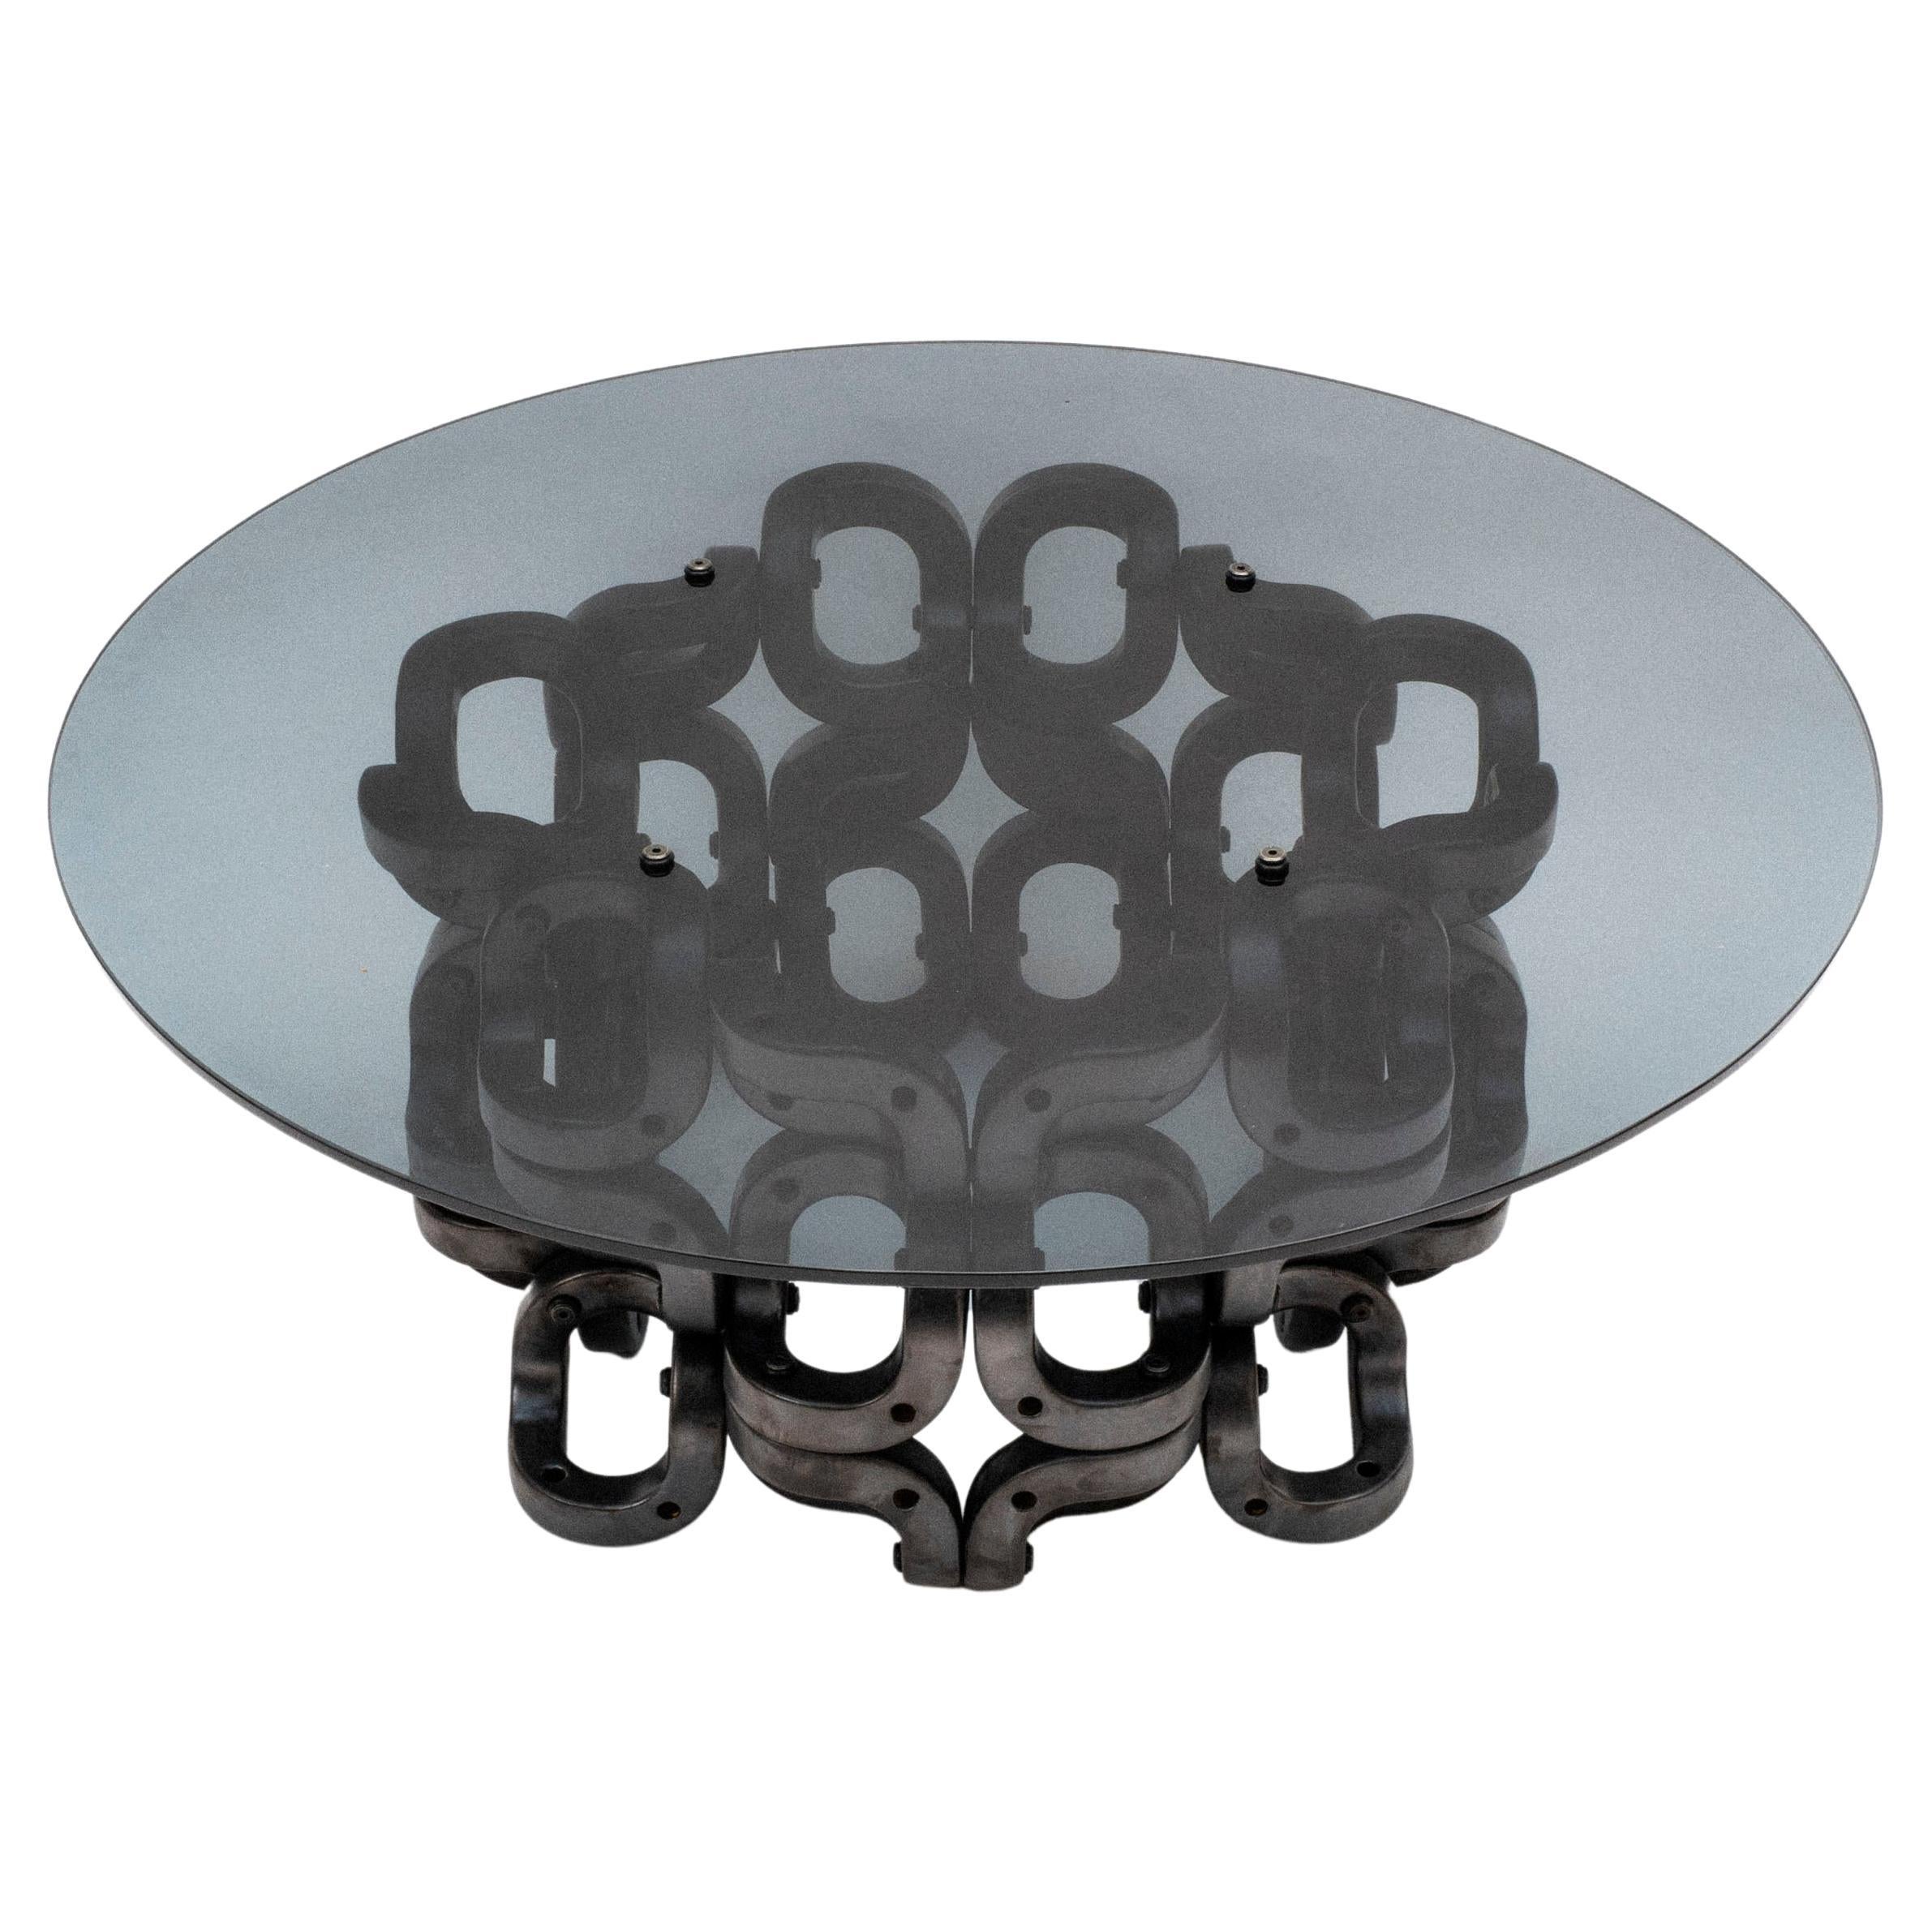 Laila; Modular Geometric Contemporary Ceramic and Glass Table by Pedro Cerisola For Sale